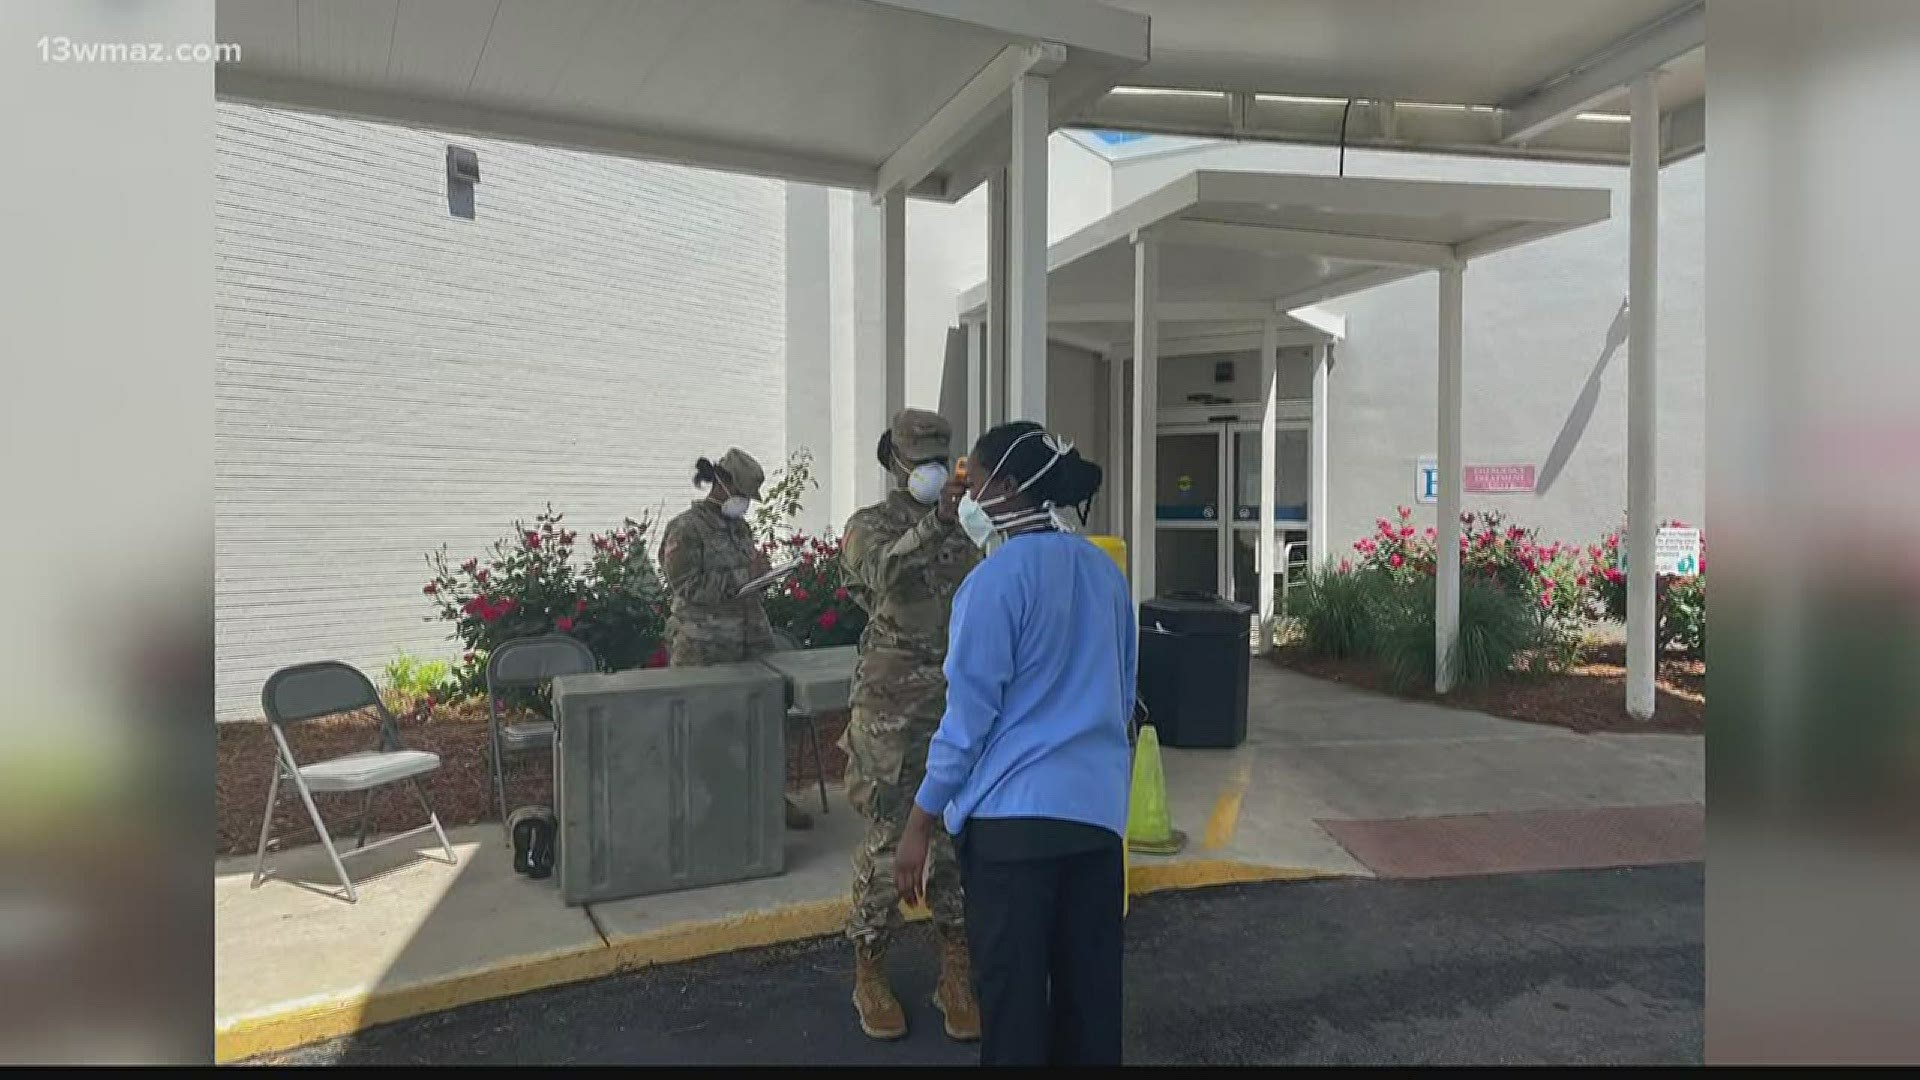 Soldiers with the Army National Guard are busy cleaning nursing homes and helping 2 local hospitals.